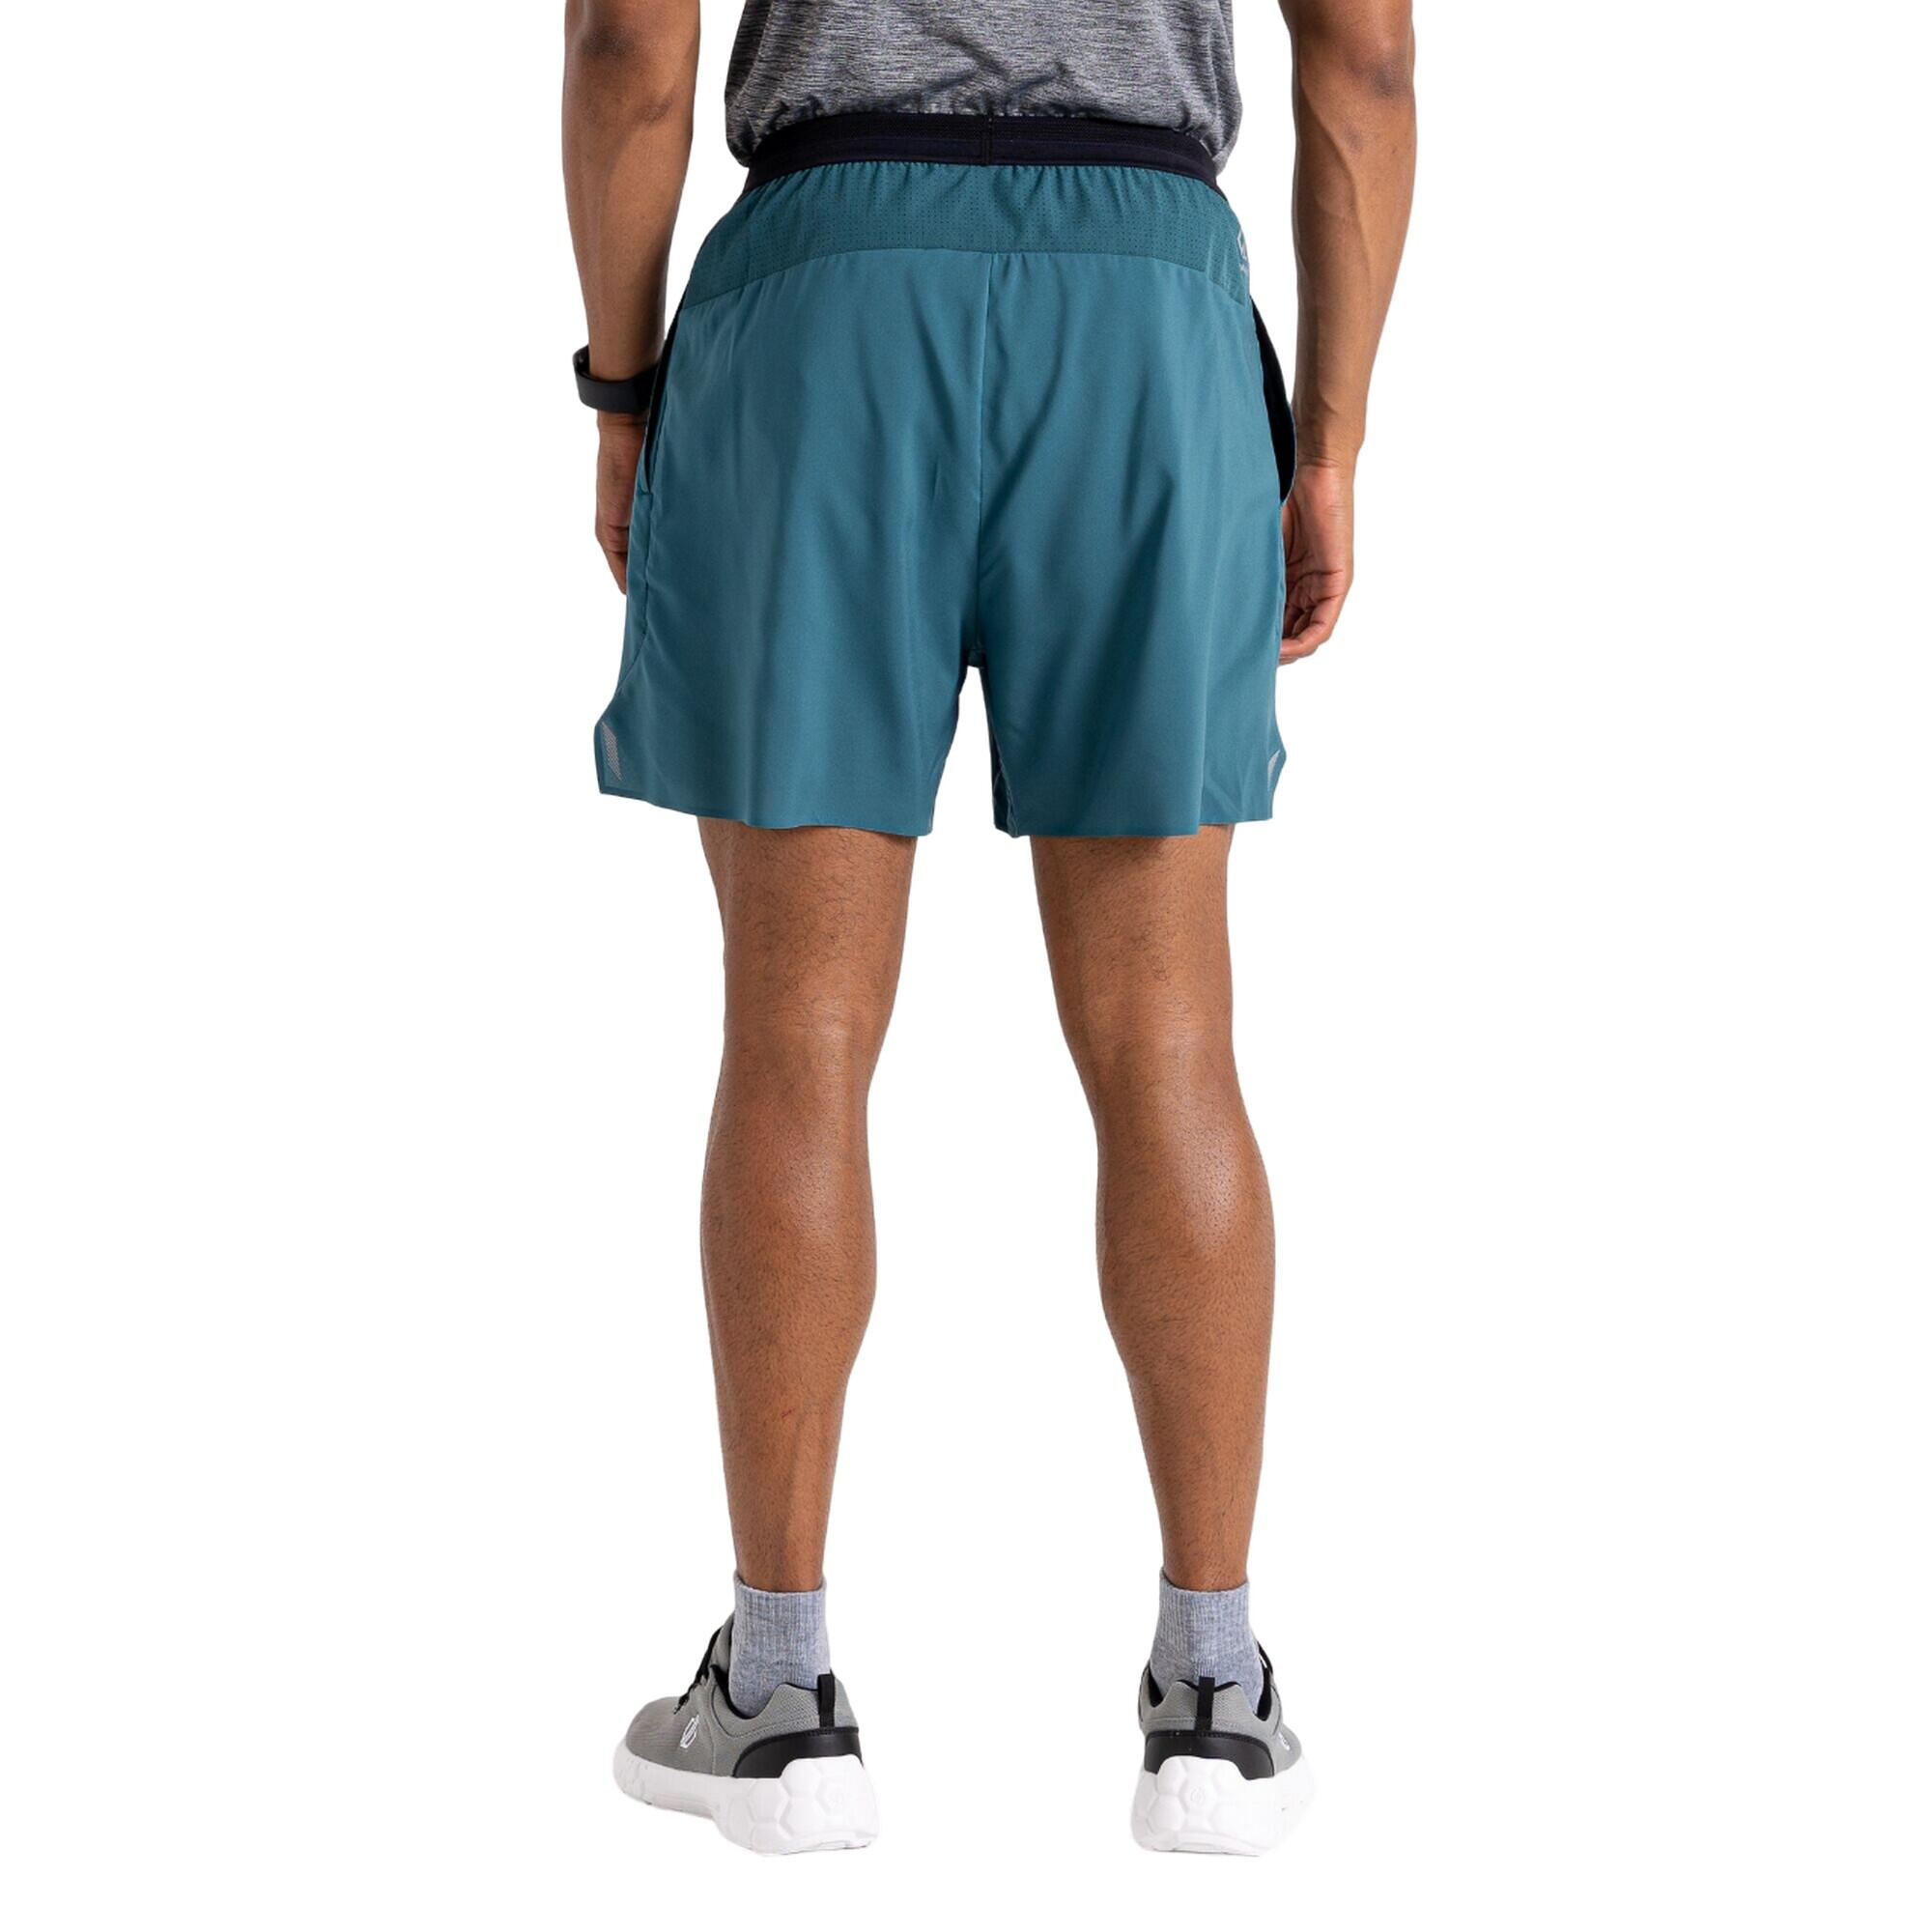 Mens Accelerate Fitness Casual Shorts (Mediterranean Green) 4/5